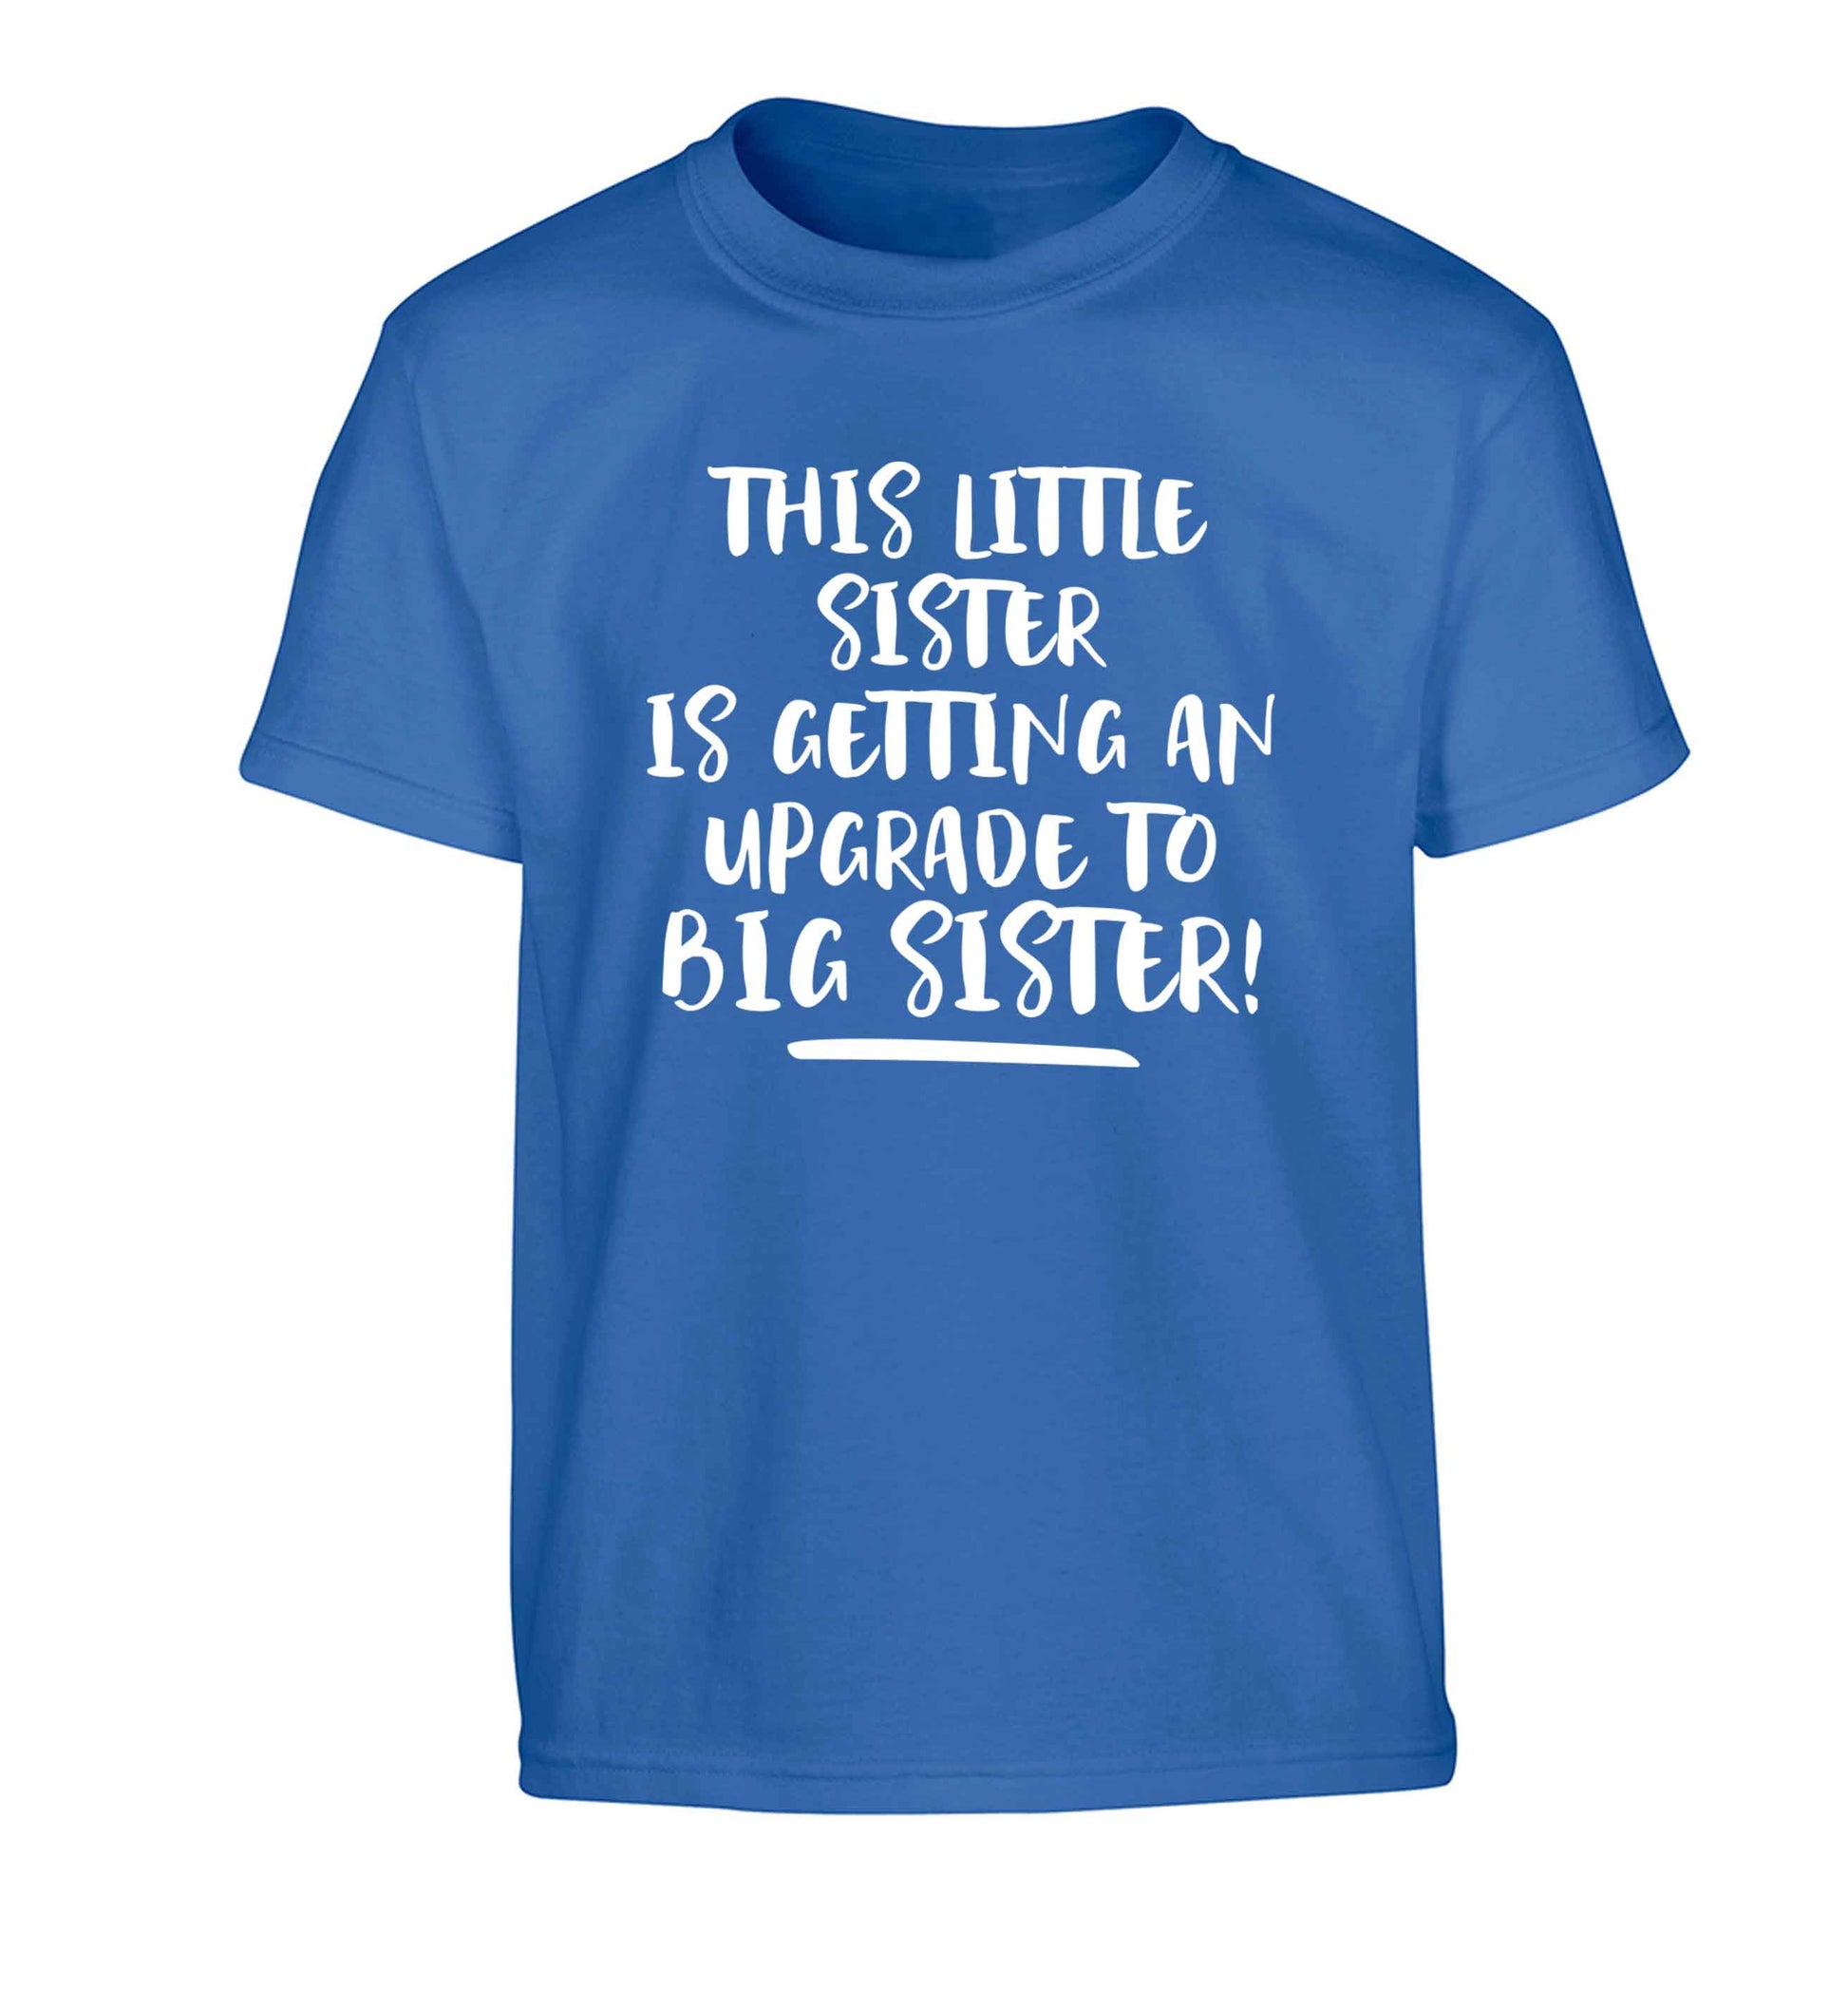 This little sister is getting an upgrade to big sister! Children's blue Tshirt 12-13 Years